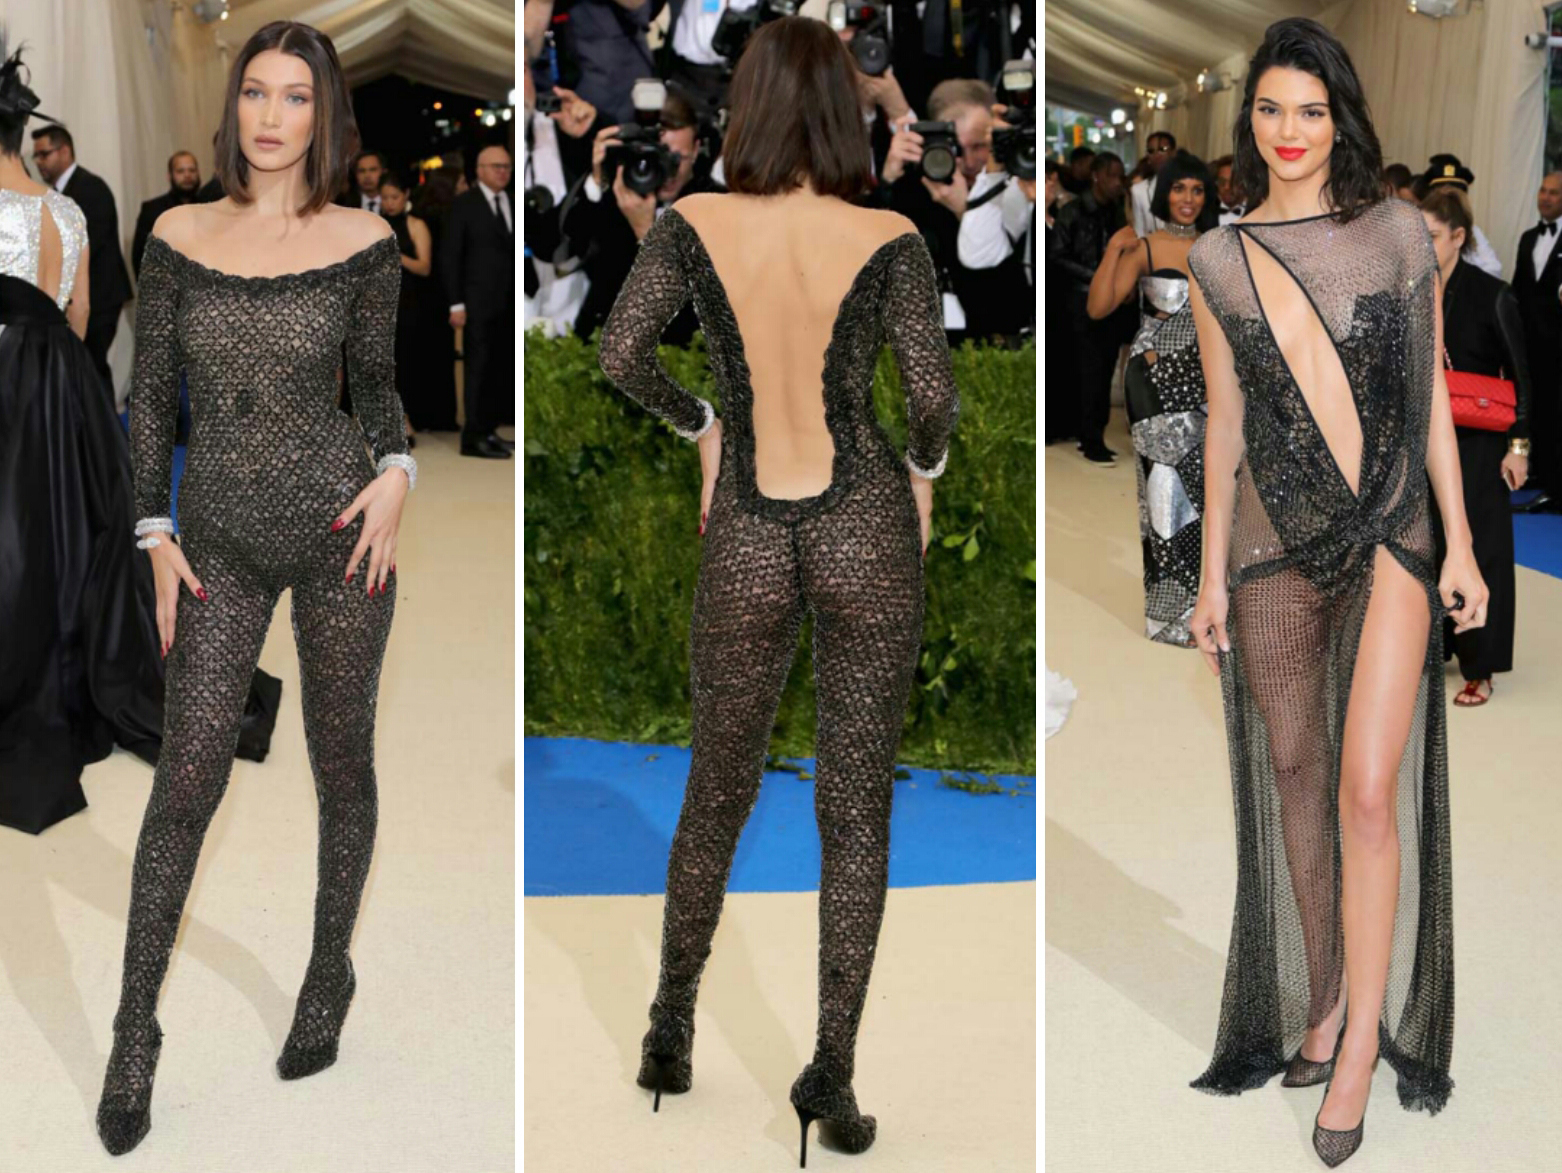 Bella Hadid wearing a jumpsuit by Alexander Wang and Kendal Jenner with Haute Couture de la Perla